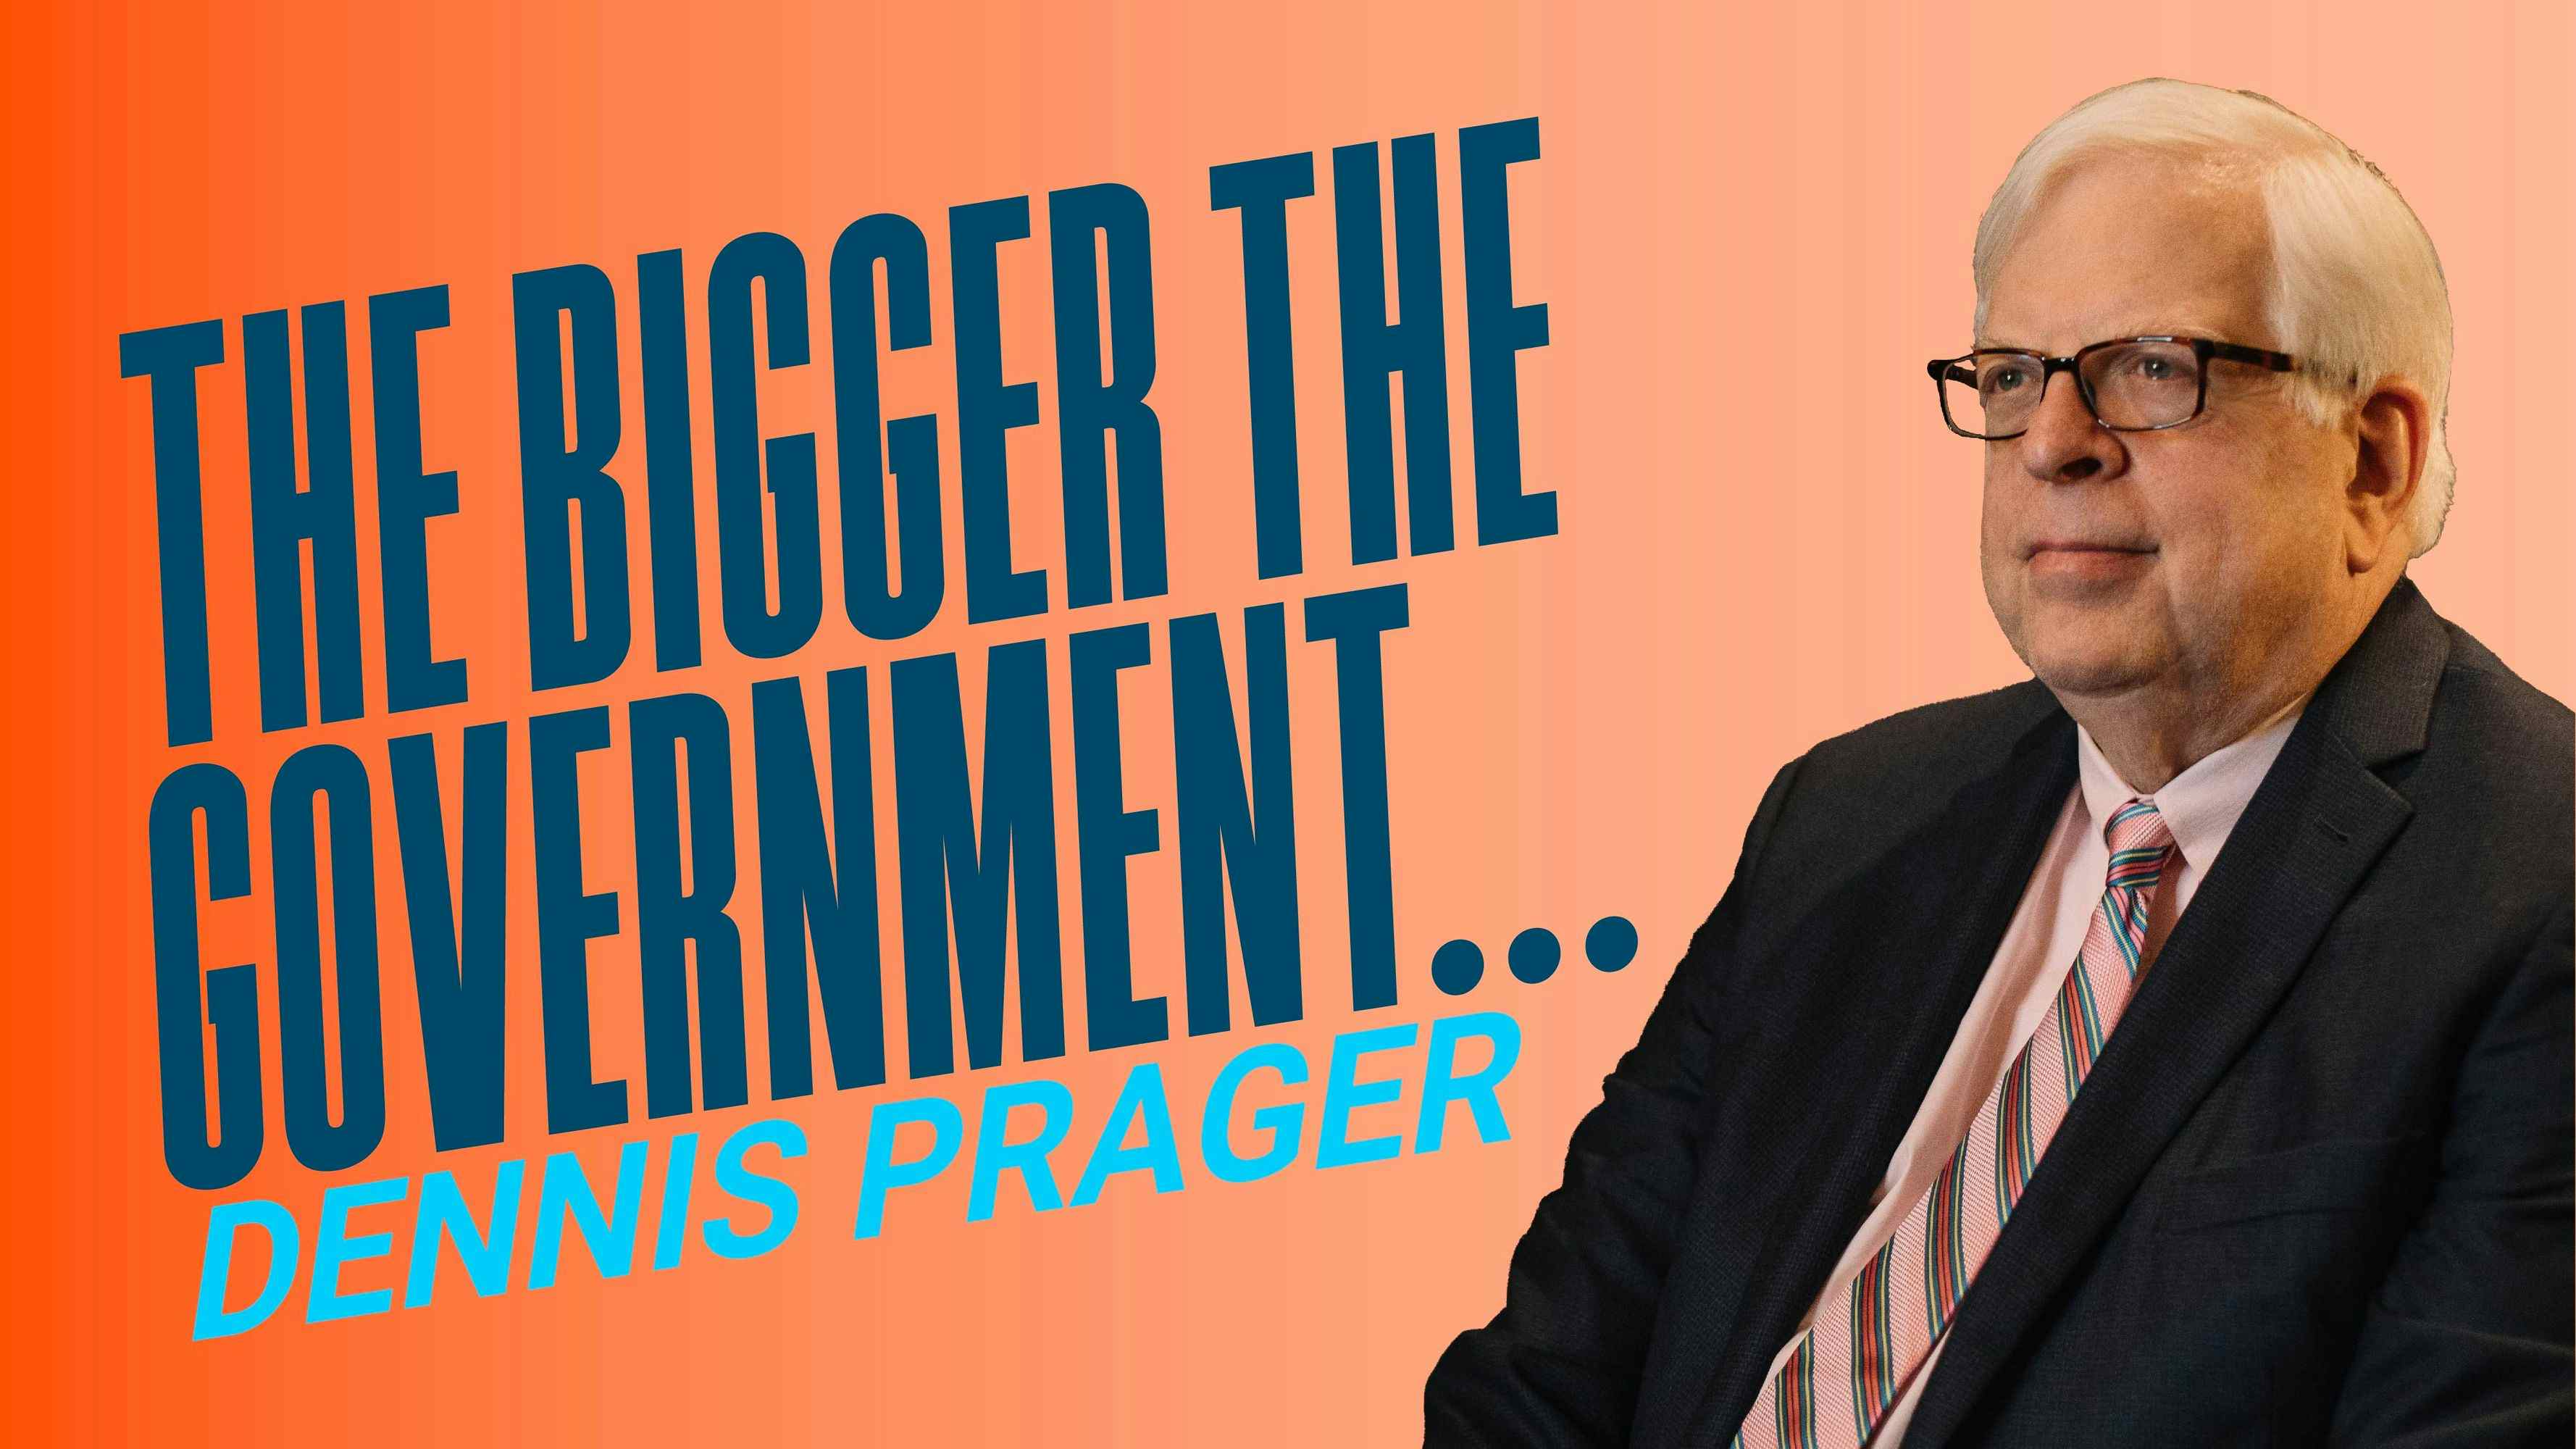 The Bigger the Government...